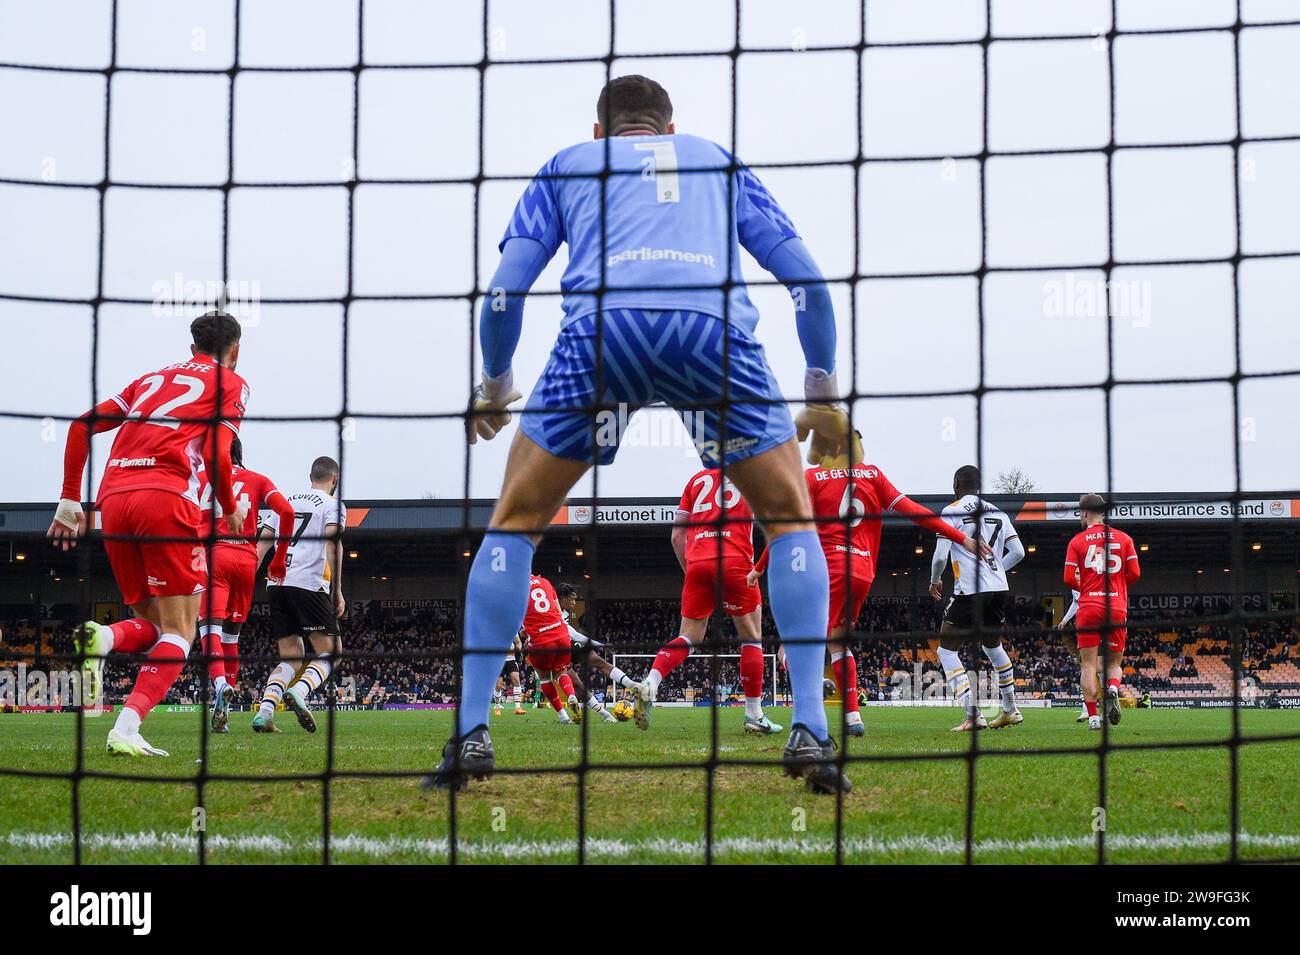 Burslem, UK, 26th December 2023. Port Vale's number 24, Rhys Walters, takes aim at the Barnsley Keeper Liam Roberts through a crowded penalty box during Vale's EFL League One Boxing Day home tie. Credit: TeeGeePix/Alamy Live News Stock Photo